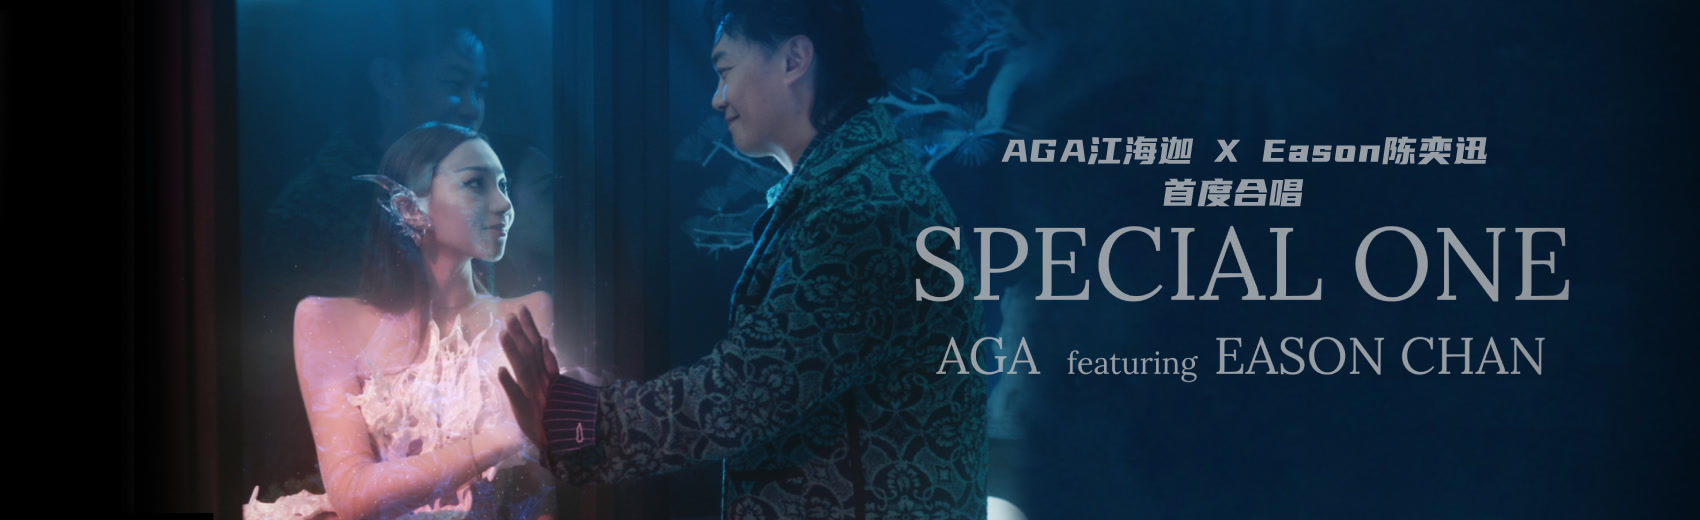 AGA - Special One 